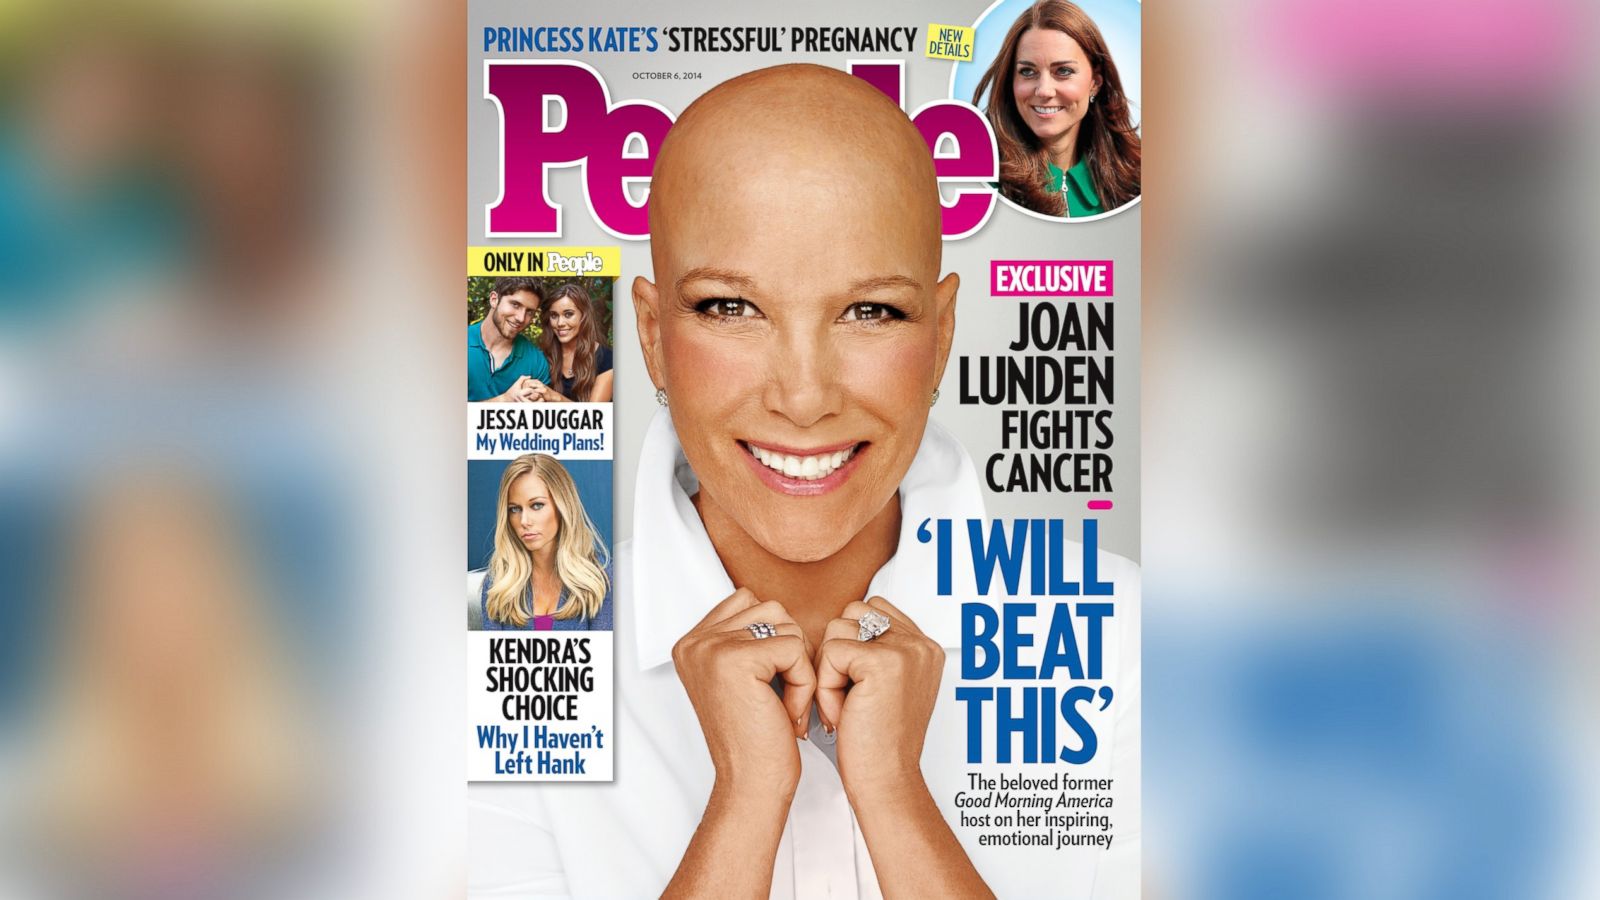 Joan Lunden Opens Up About Cancer Battle and Losing Her Hair - ABC News